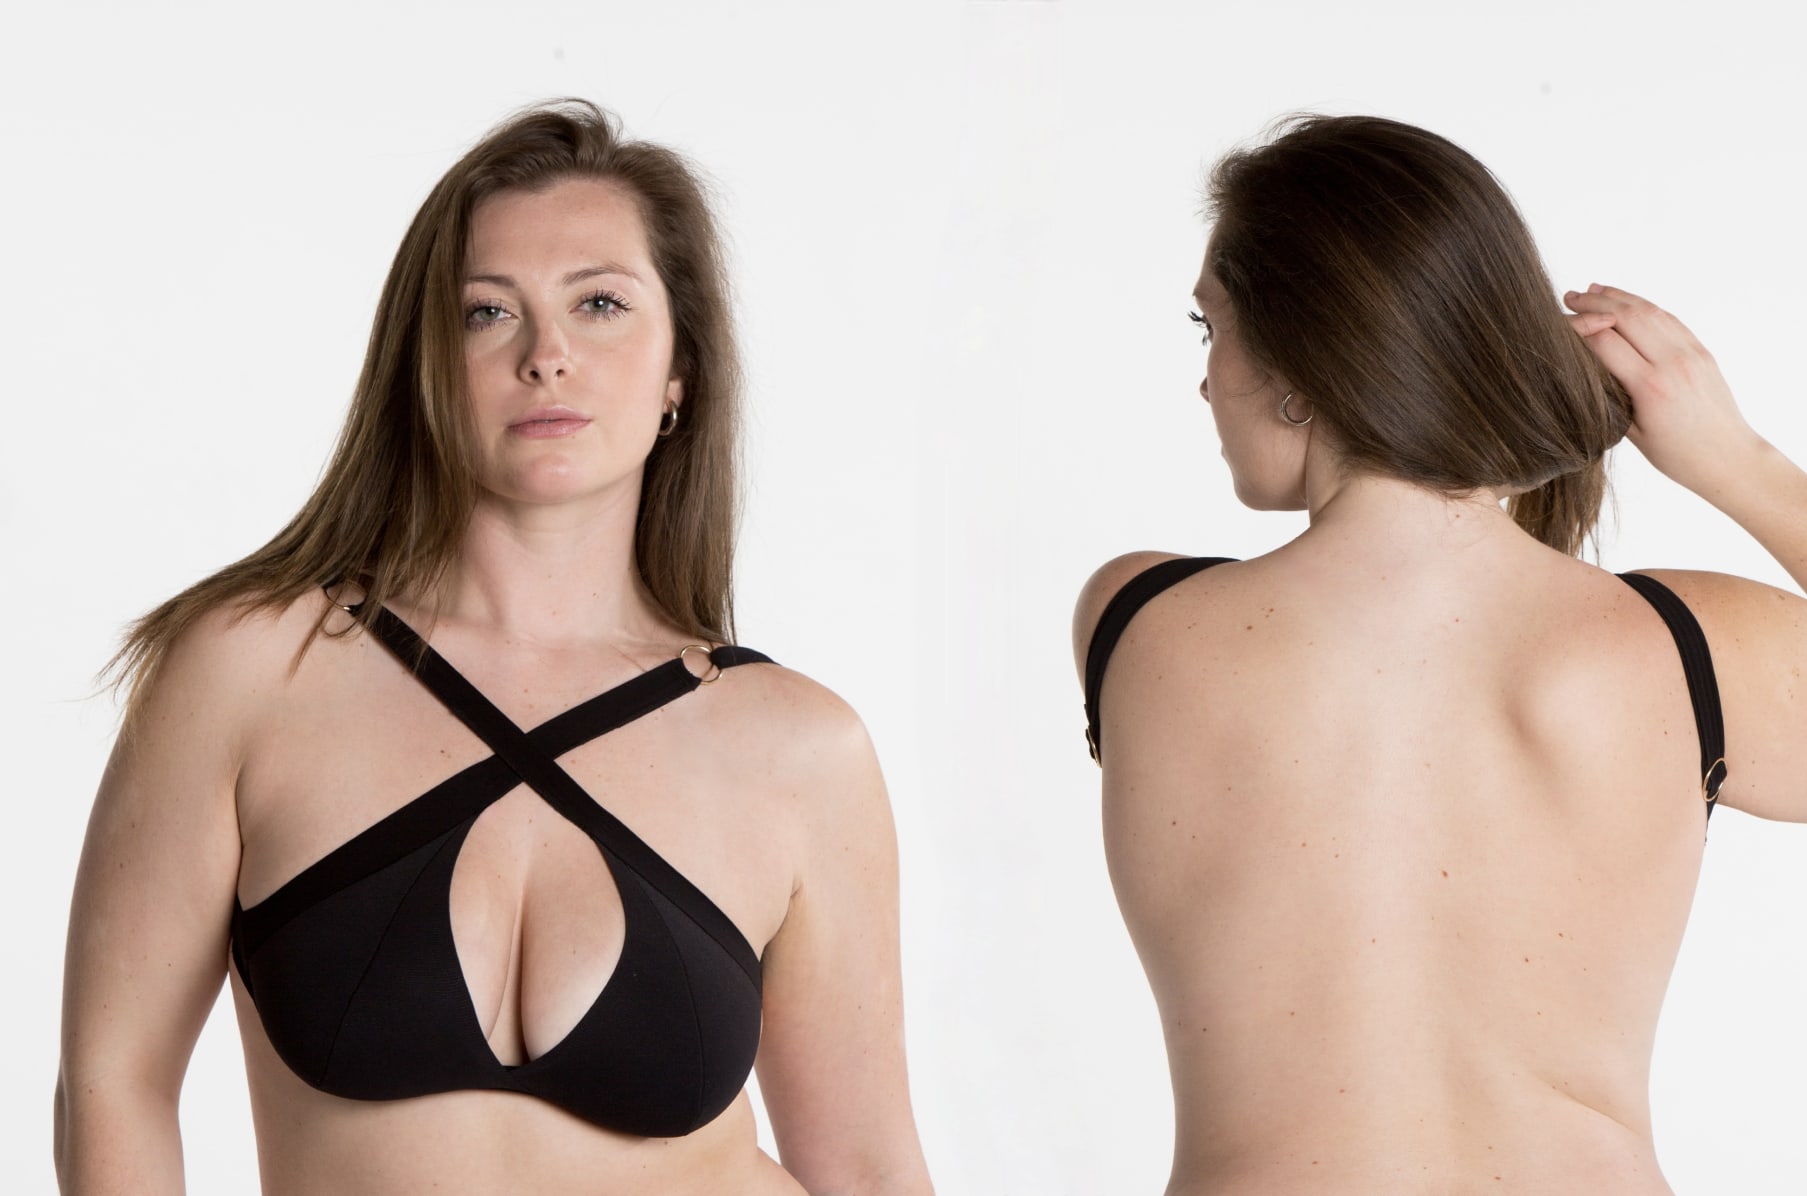 Here's the differences between Nuudii and some popular bras + how they